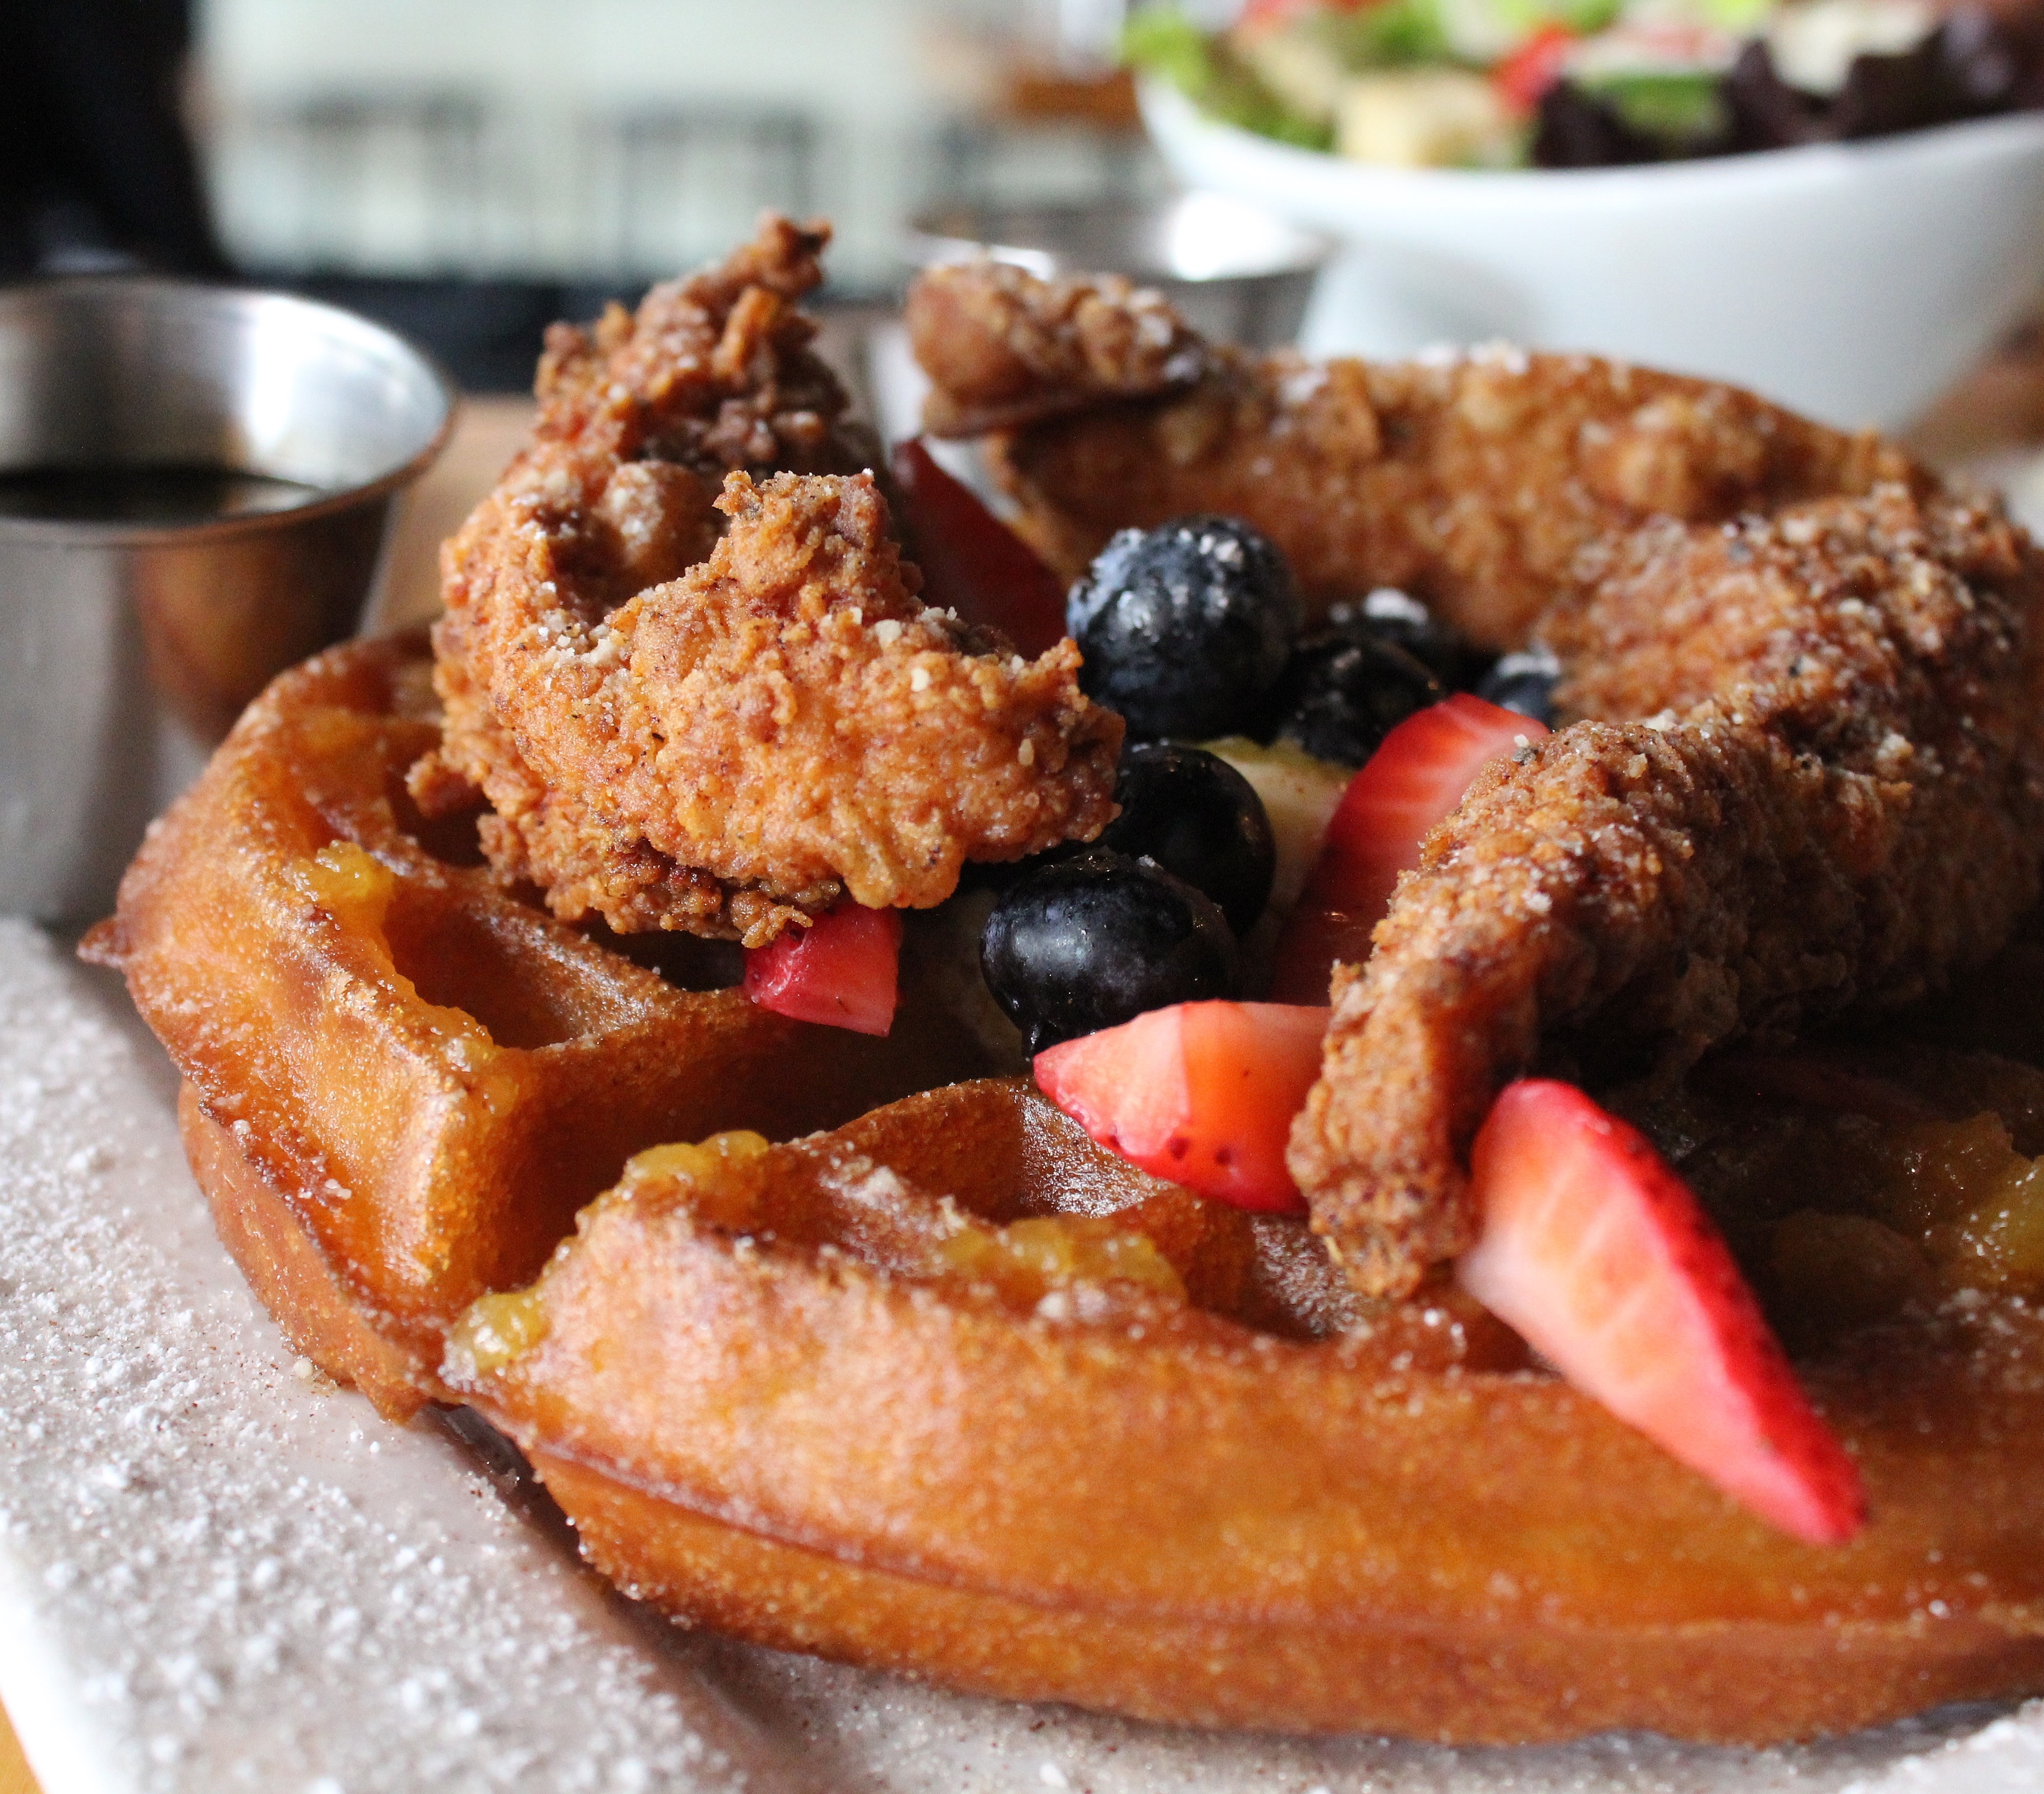 Chicken & Waffles – Two Times in One Weekend